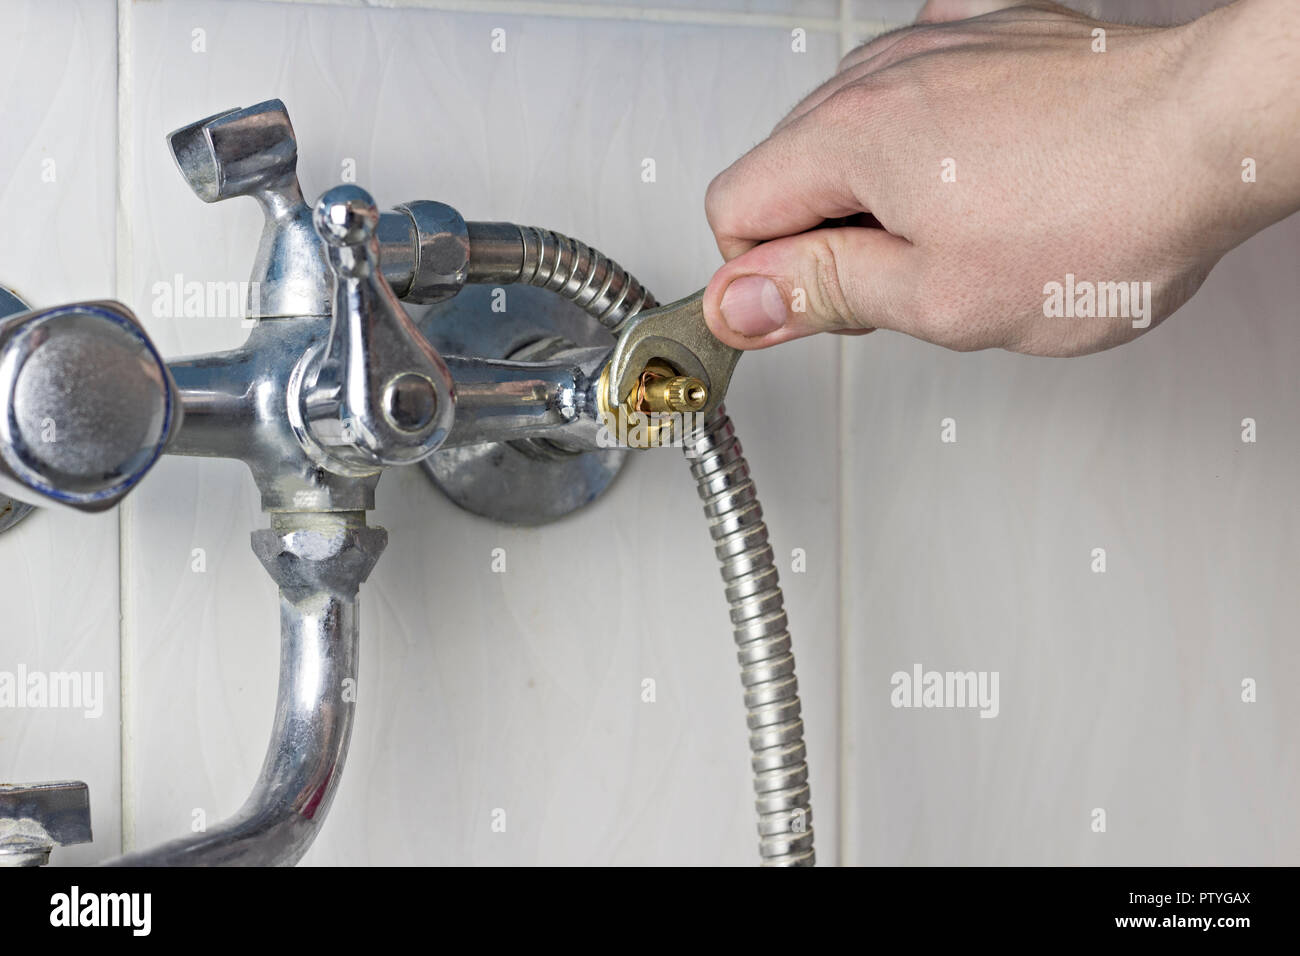 A man is repairing a water tap, a close-up Stock Photo